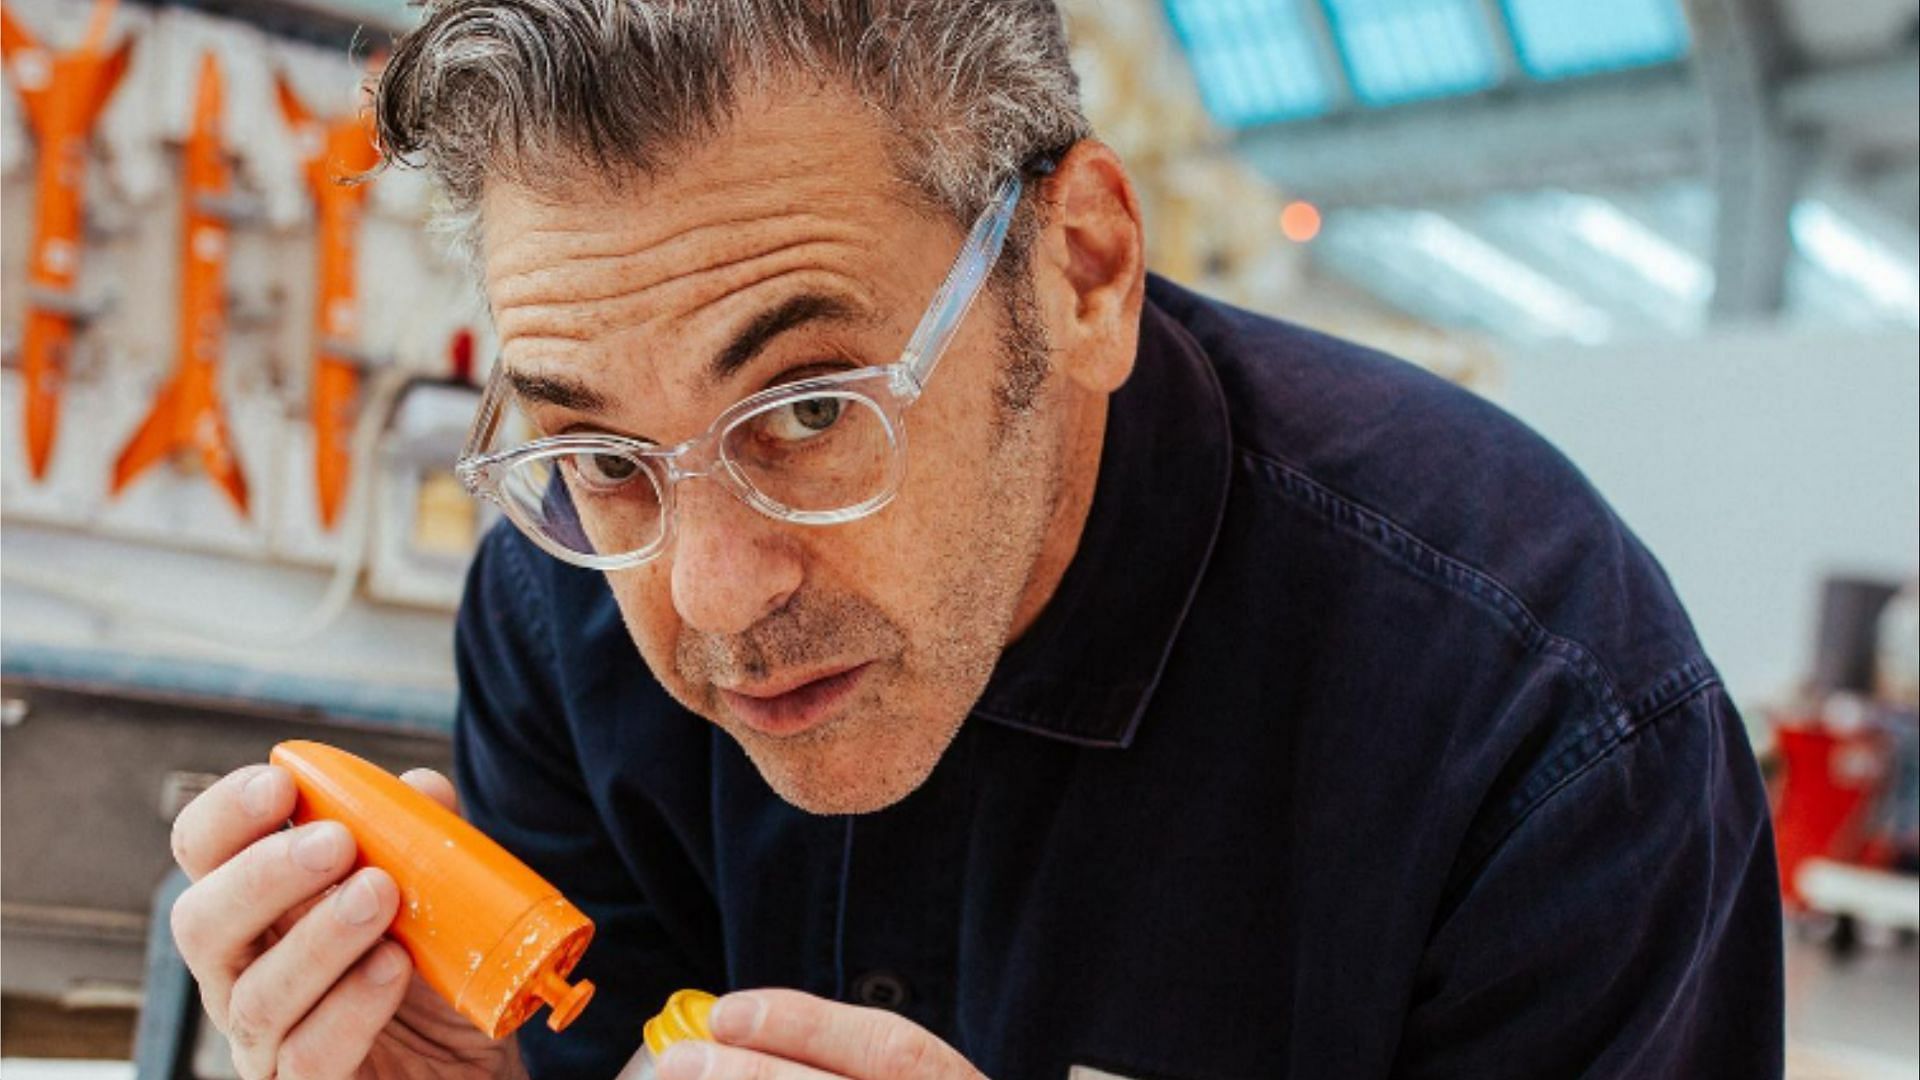 Nike collaborator Tom Sachs exposed for having toxic workplace culture (Image via tomsachs/Instagram)